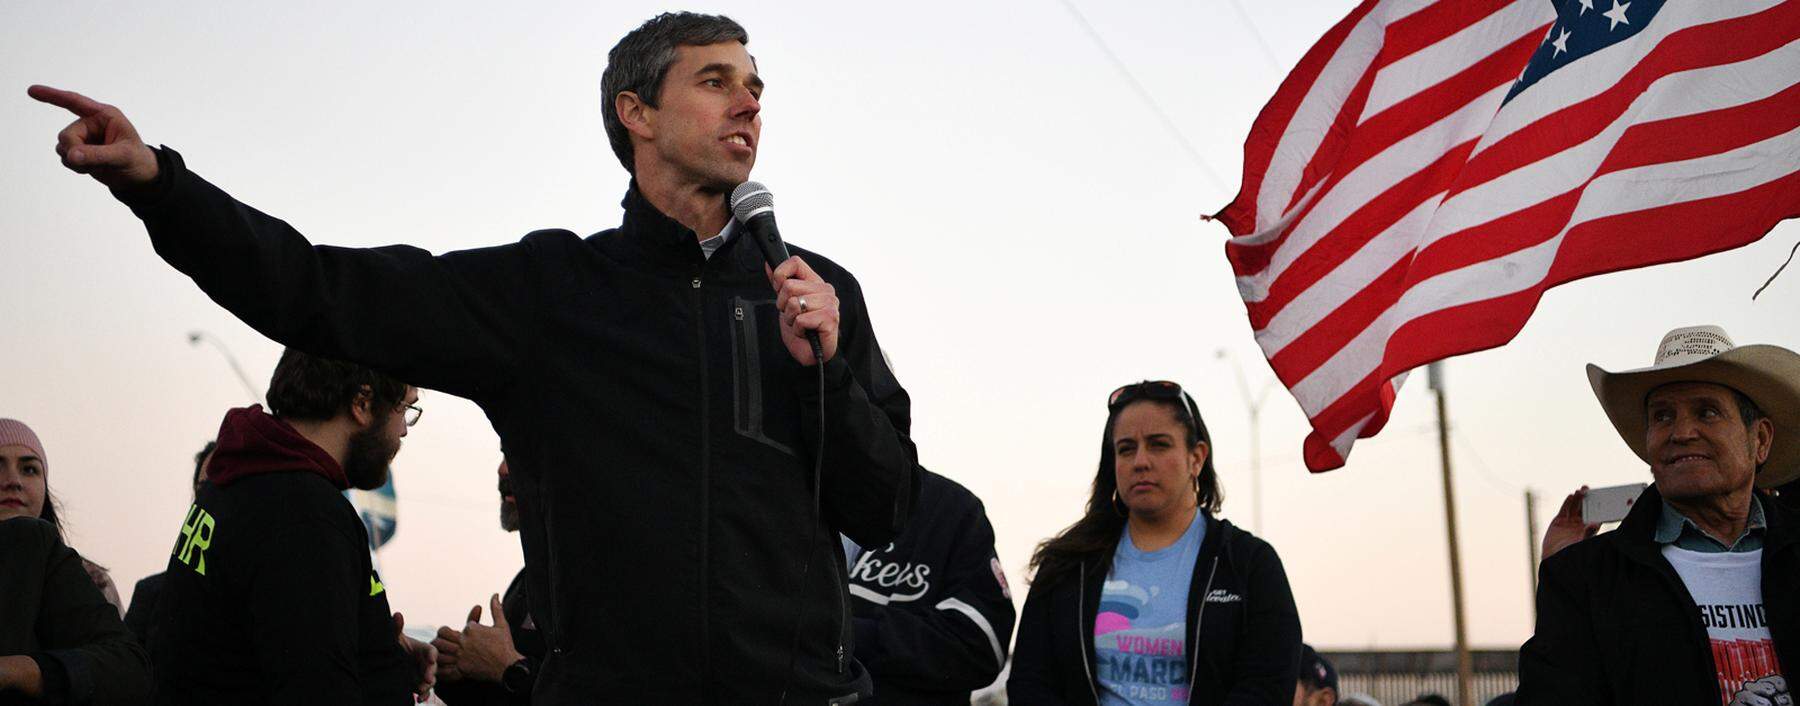 O´Rourke, the Democratic former Texas congressman, addresses supporters before a march in El Paso